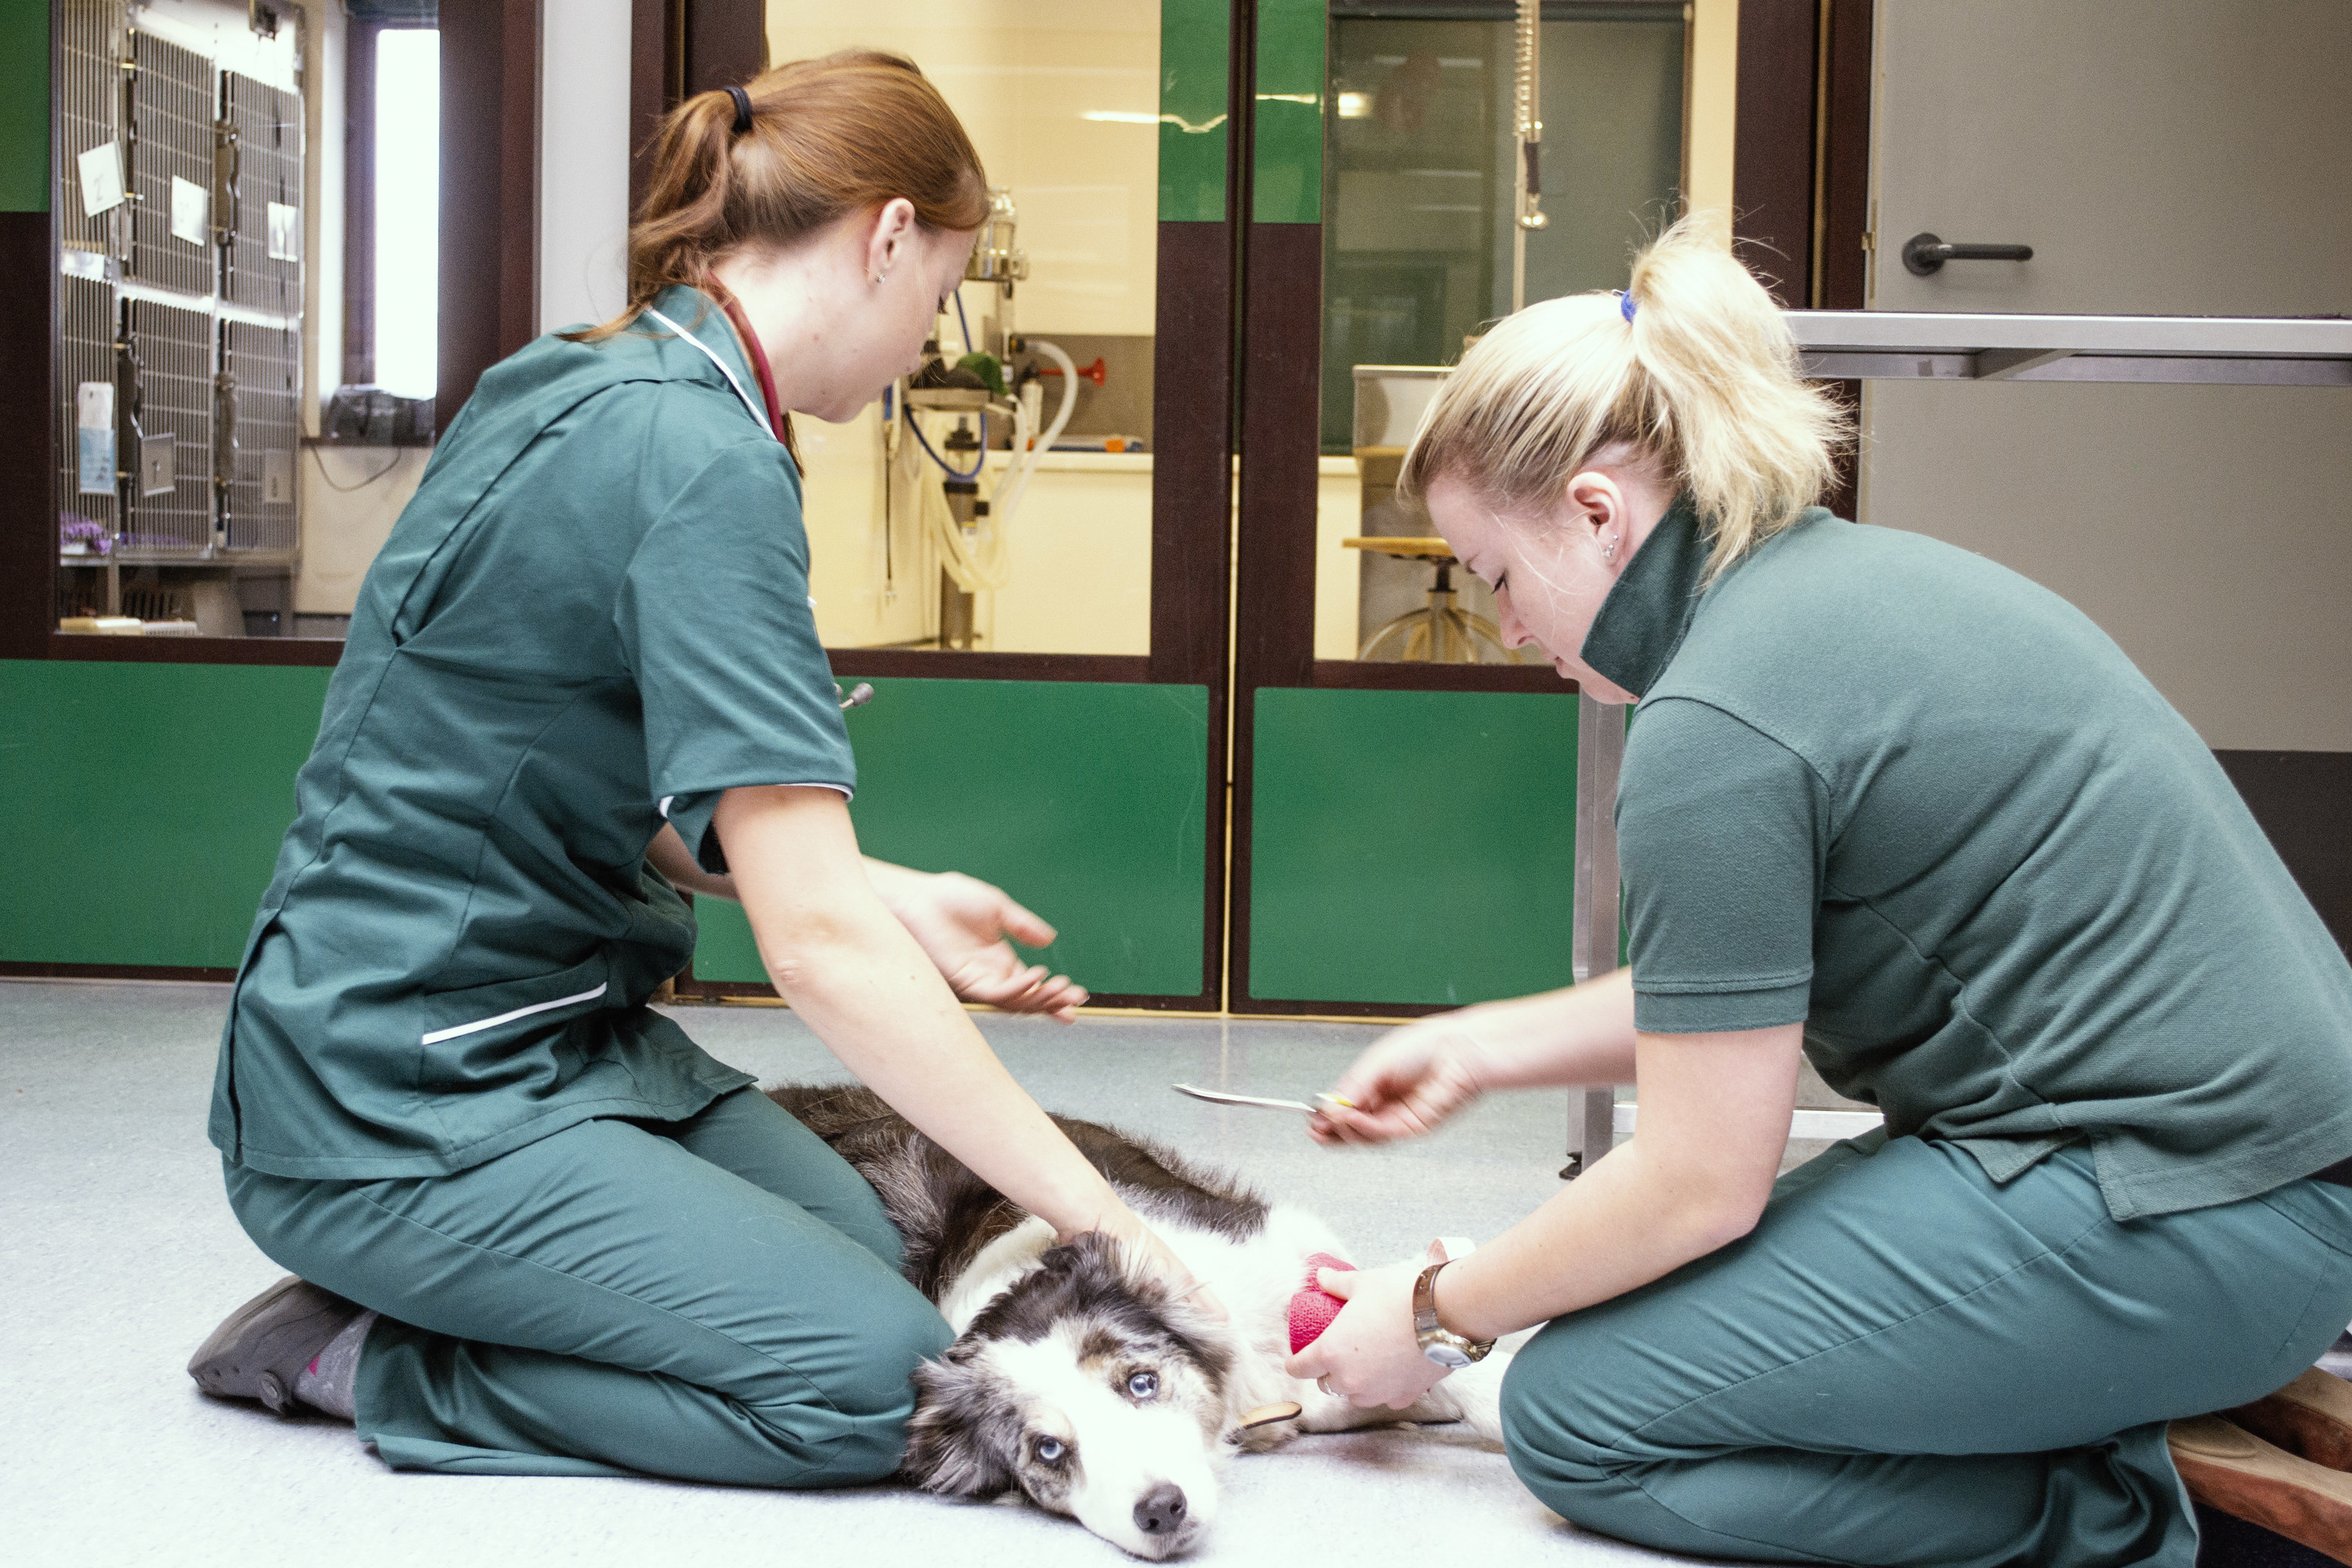 Two veterinarians treating a dog on the ground of the office